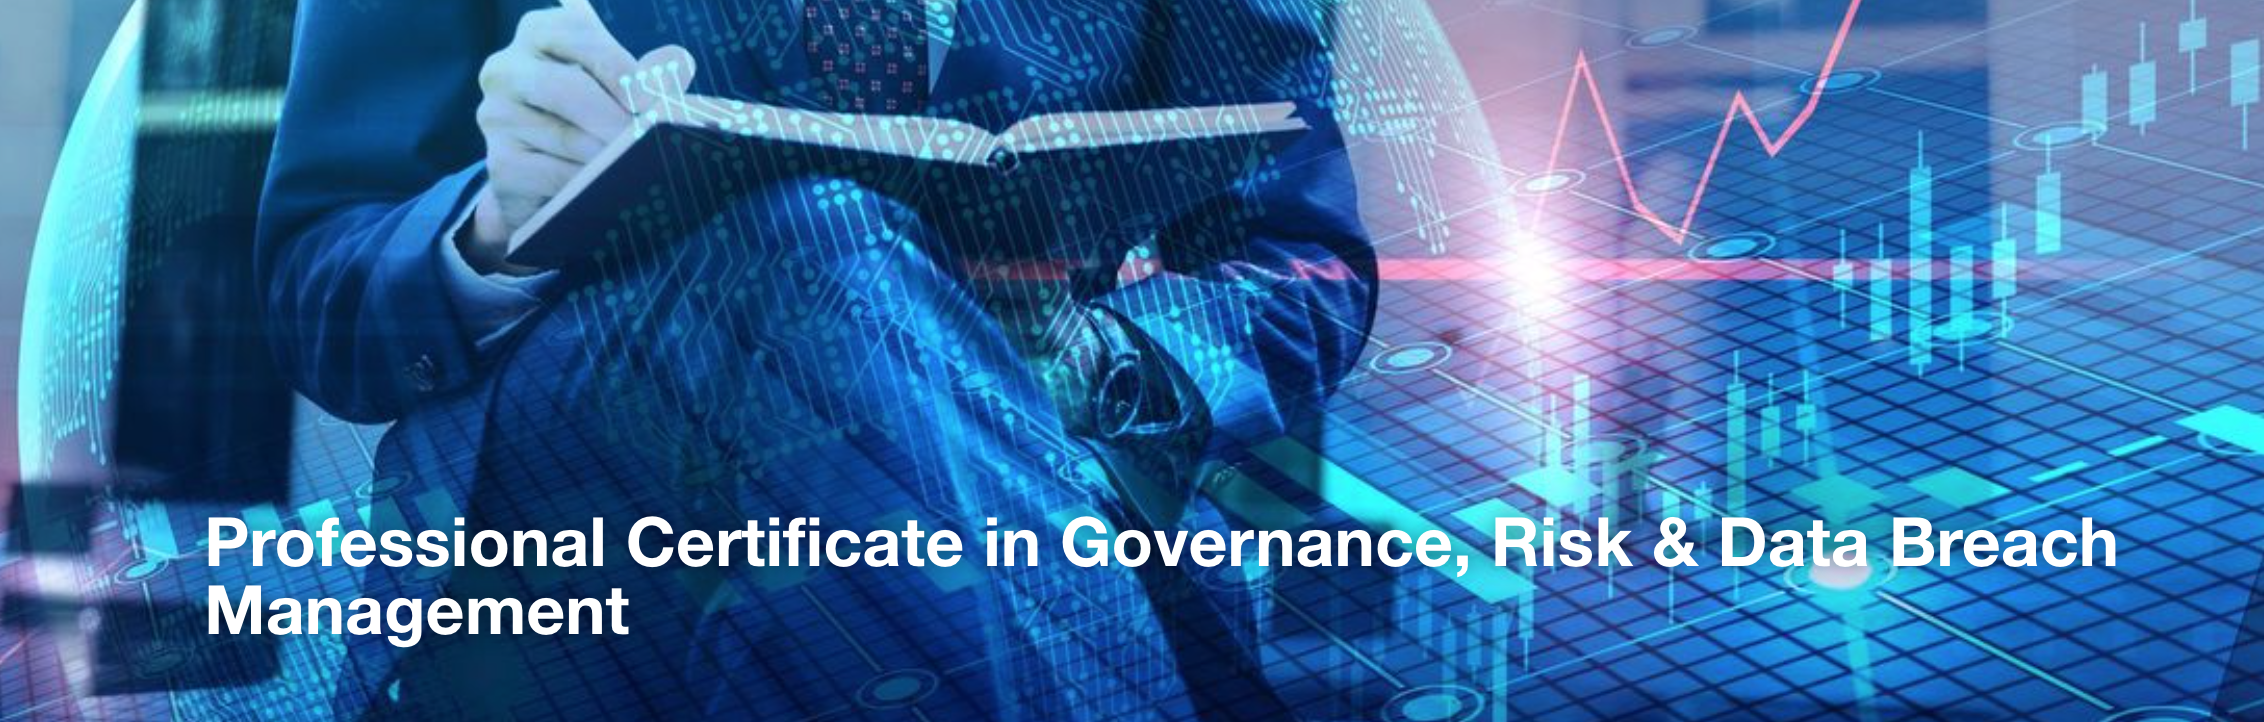 NUS professional certification in governance, risk and data breach management